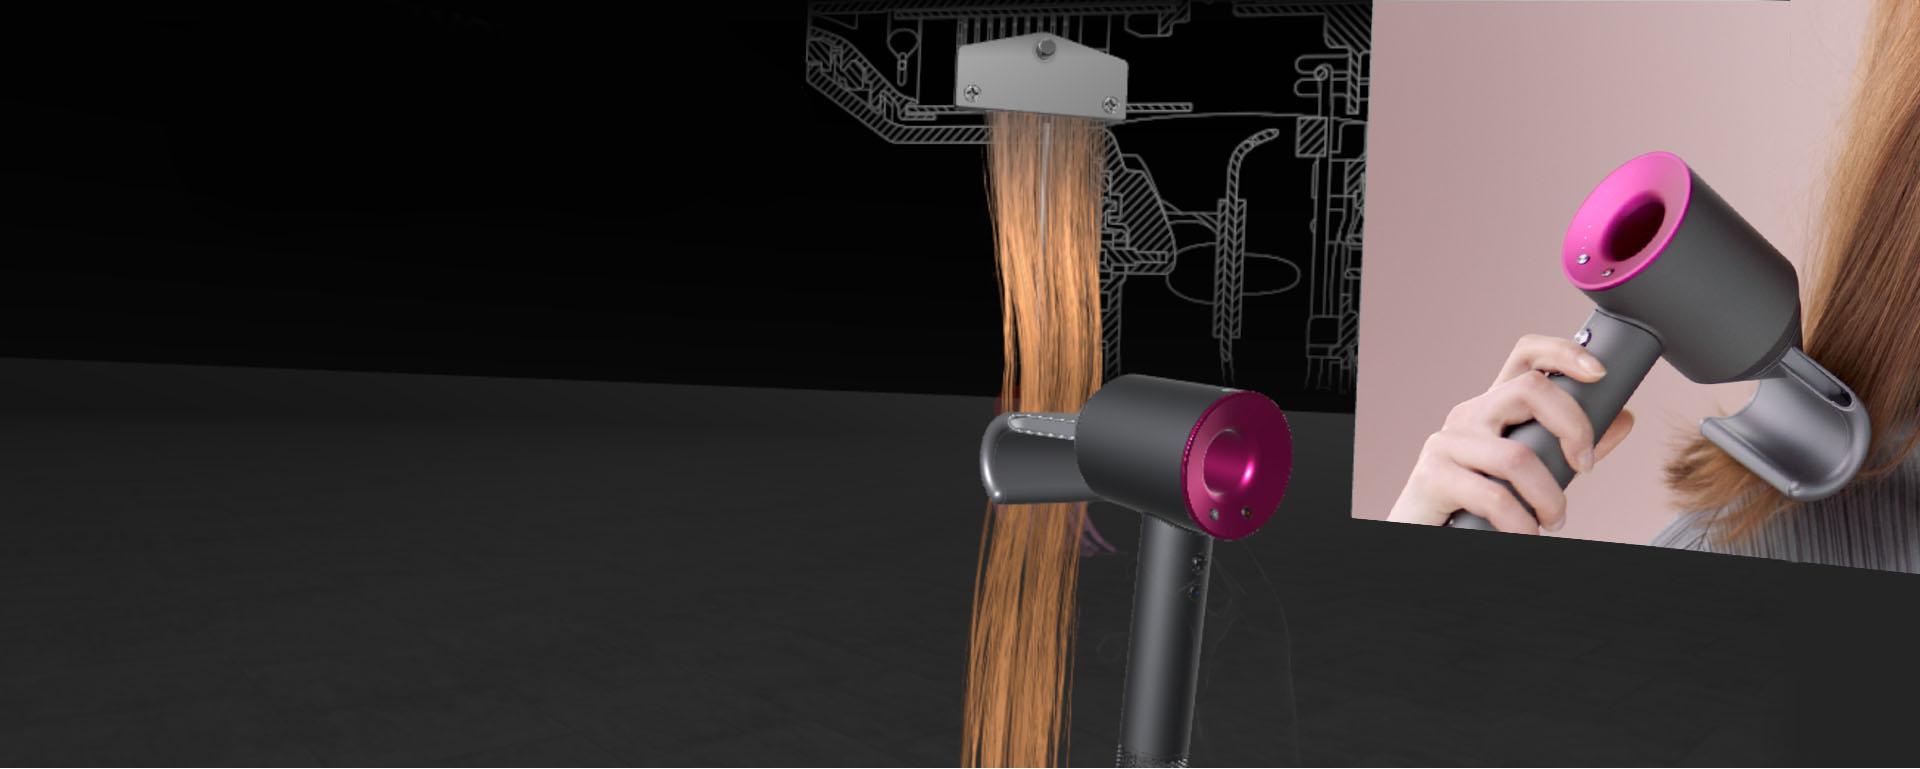 Finishing a hairstyle in virtual reality with the Flyaway attachment on the Dyson Supersonic hair dryer